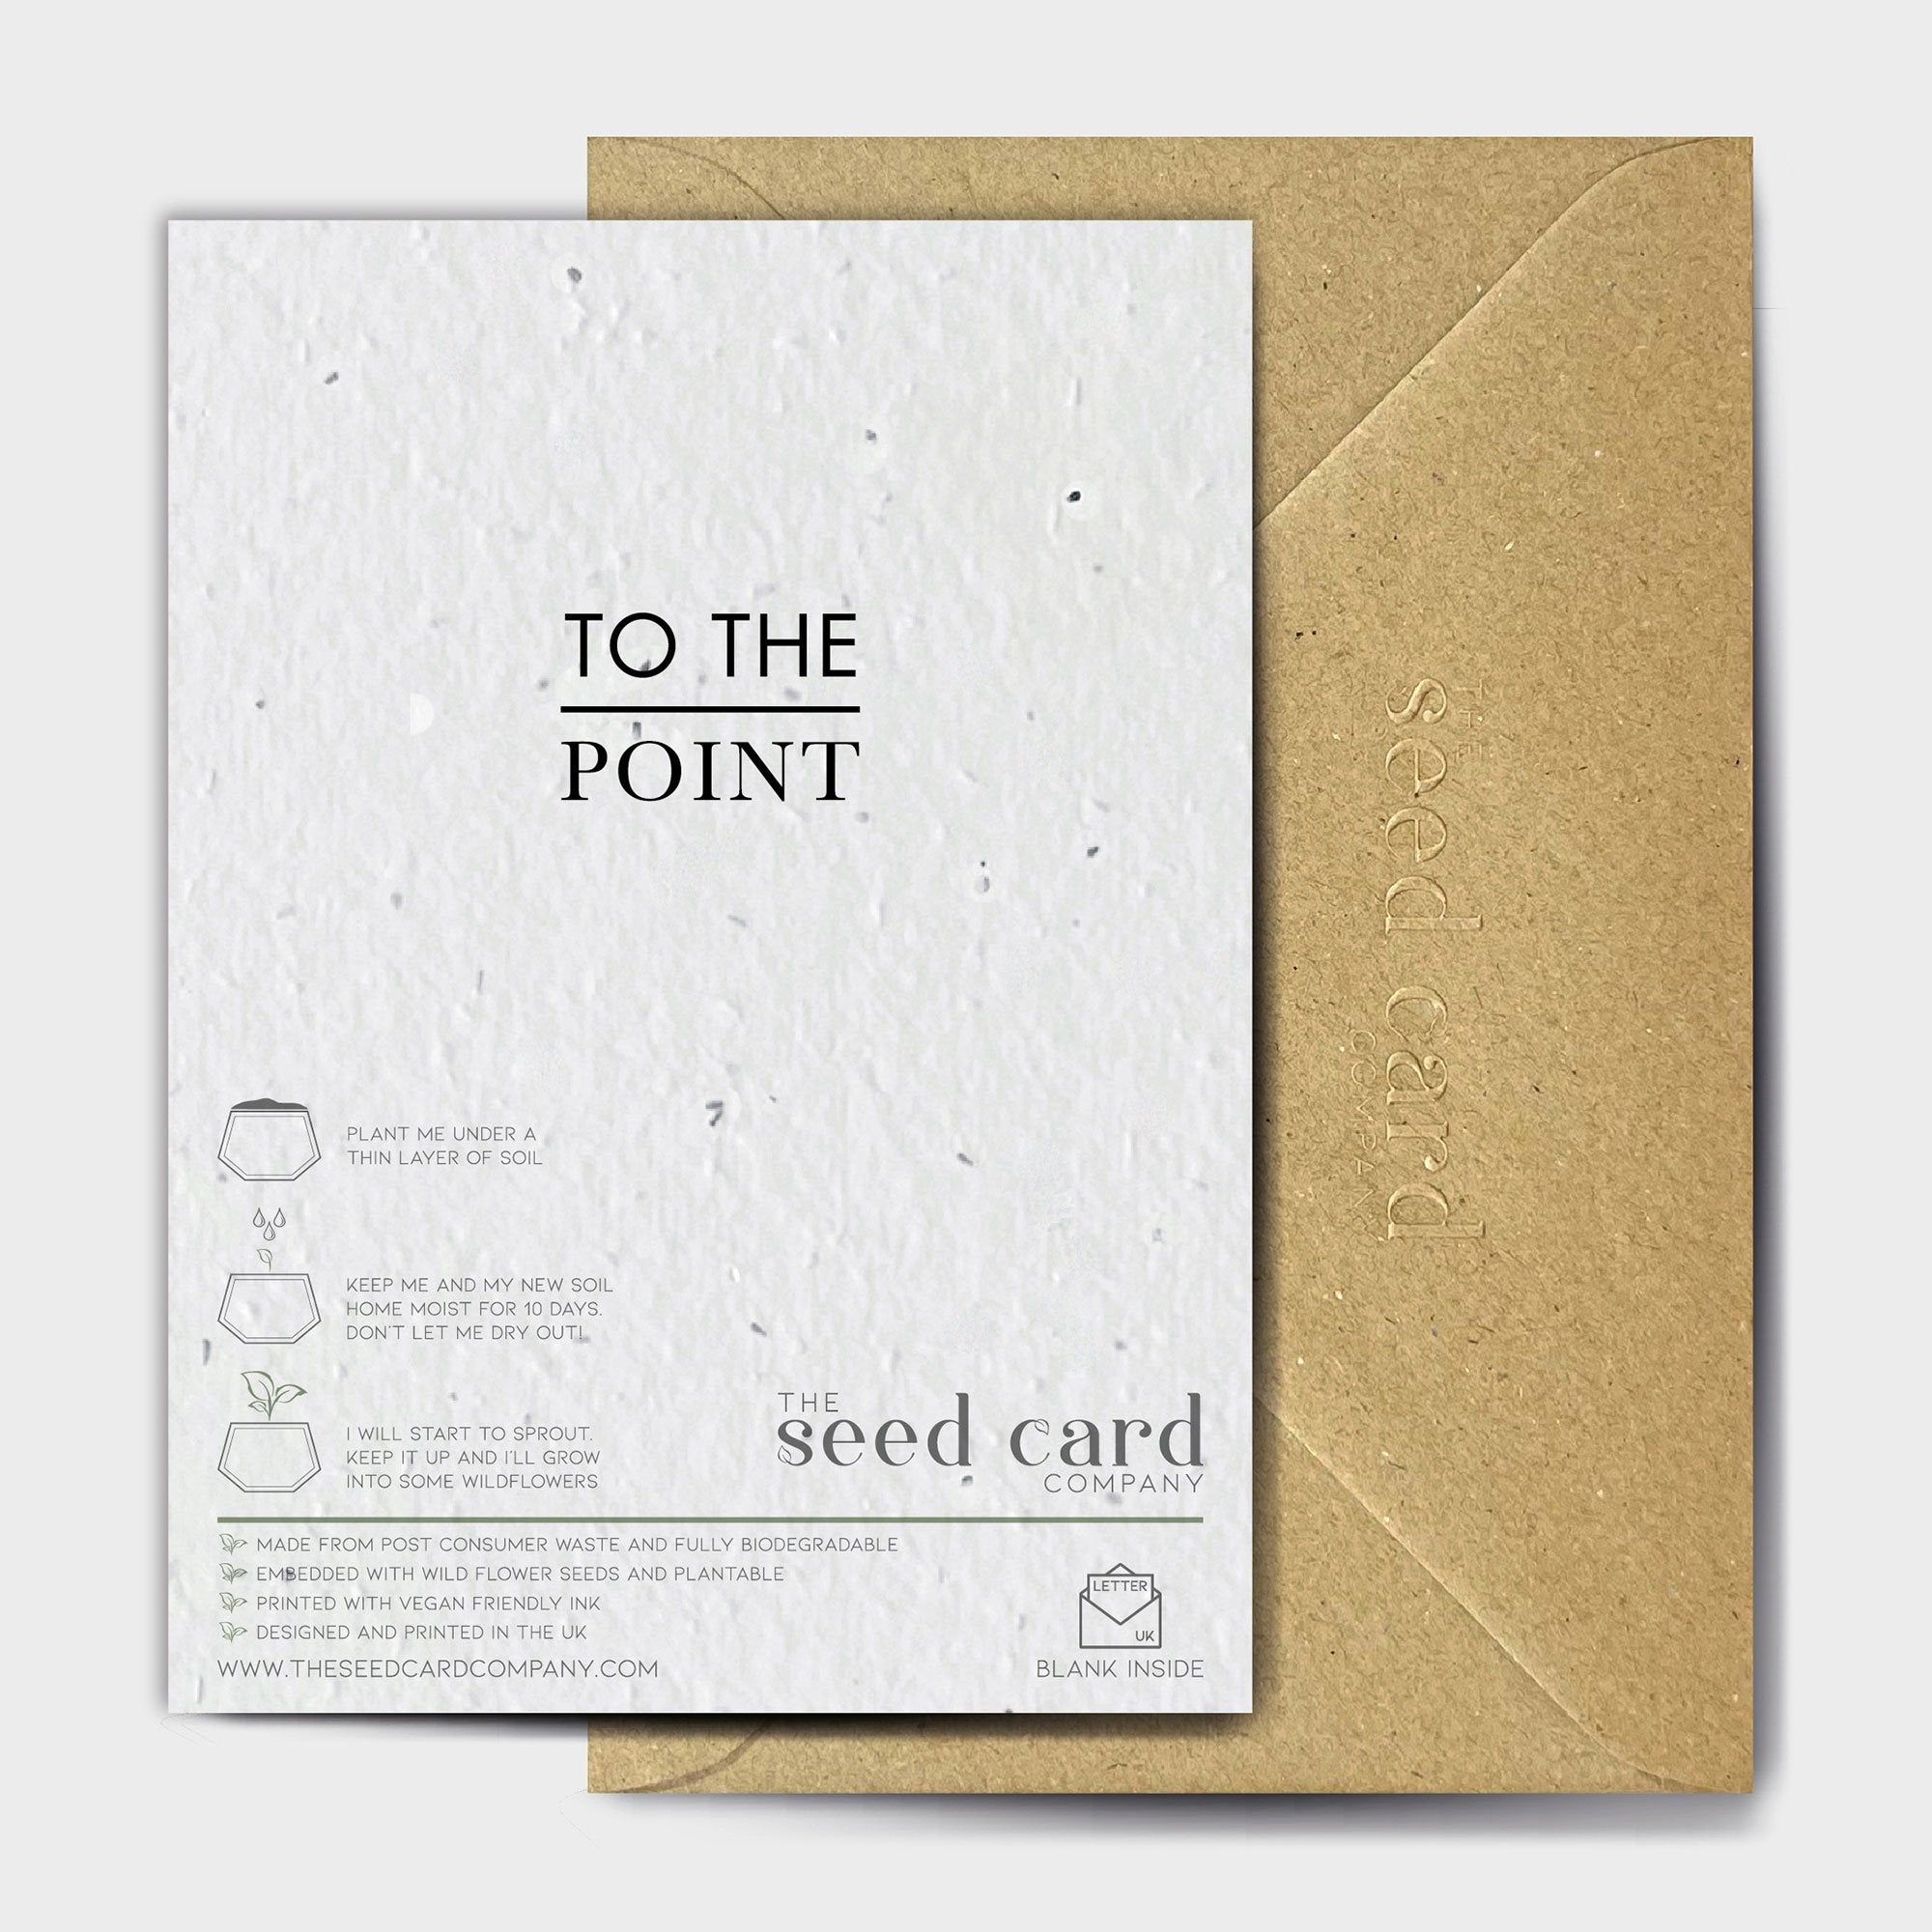 Shop online A Factual Truth - 100% biodegradable seed-embedded cards Shop -The Seed Card Company